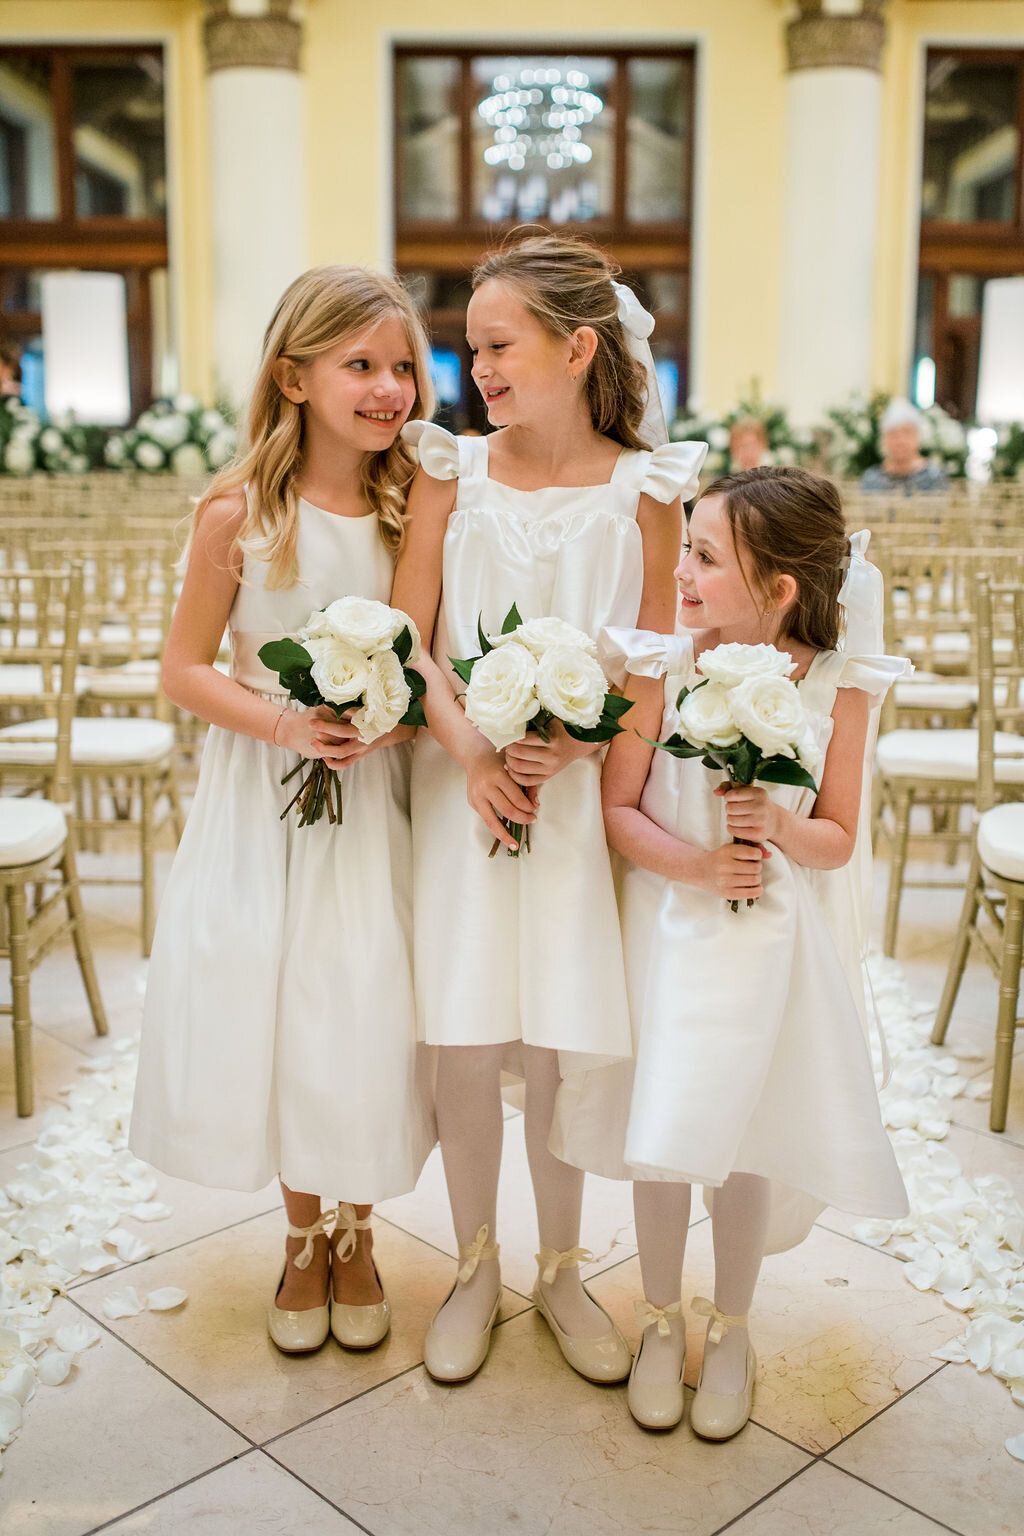 Flower girls for an all white and greenery winter wedding flowers. Nashville wedding florist, Rosemary & Finch, at Union Station Hotel.